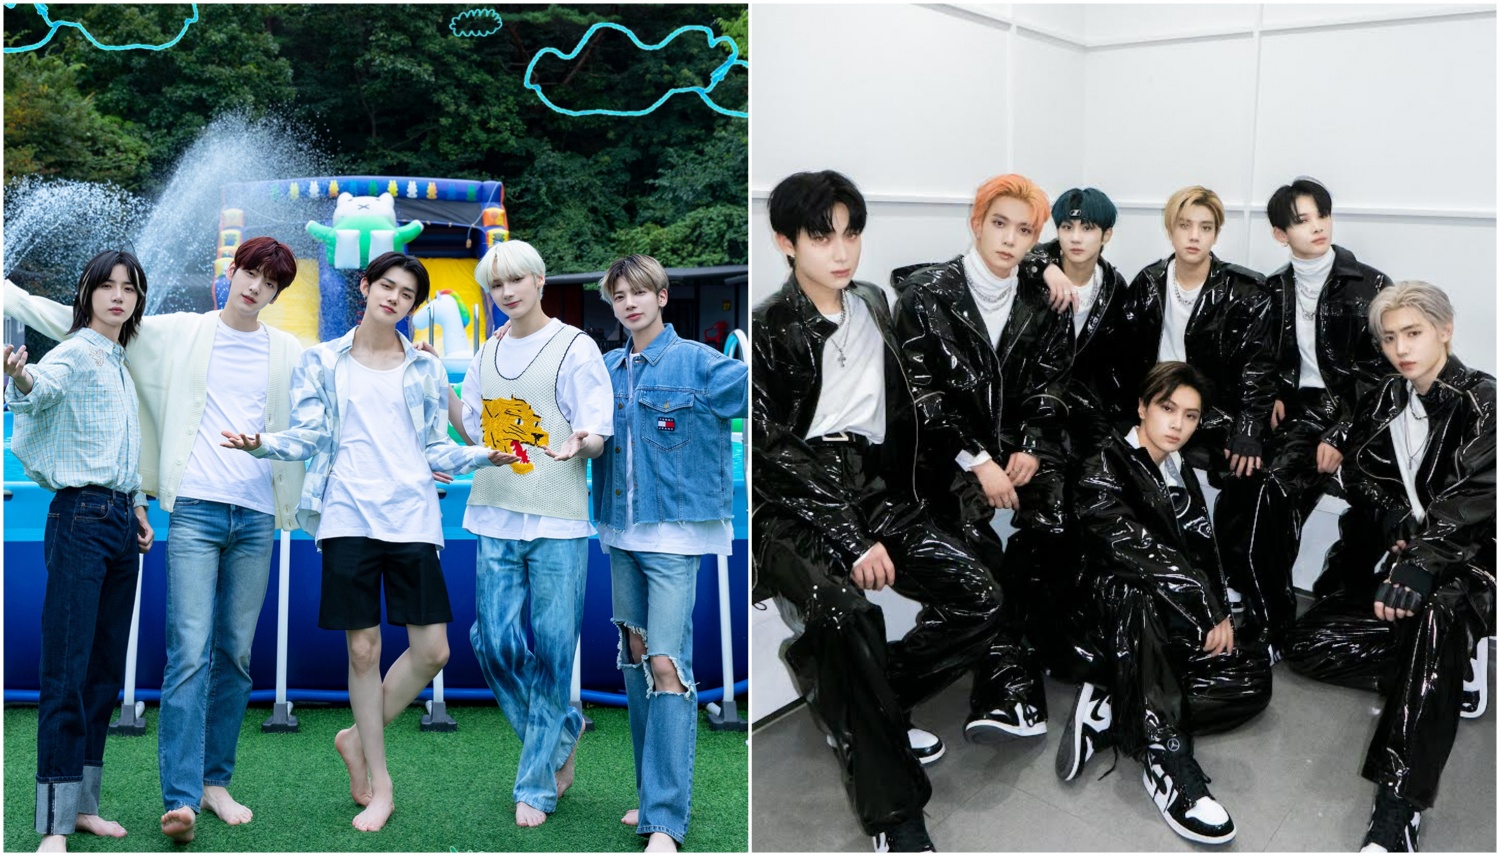 ENHYPEN Interview July 2021: K-Pop Band New Music, Fans, Competition